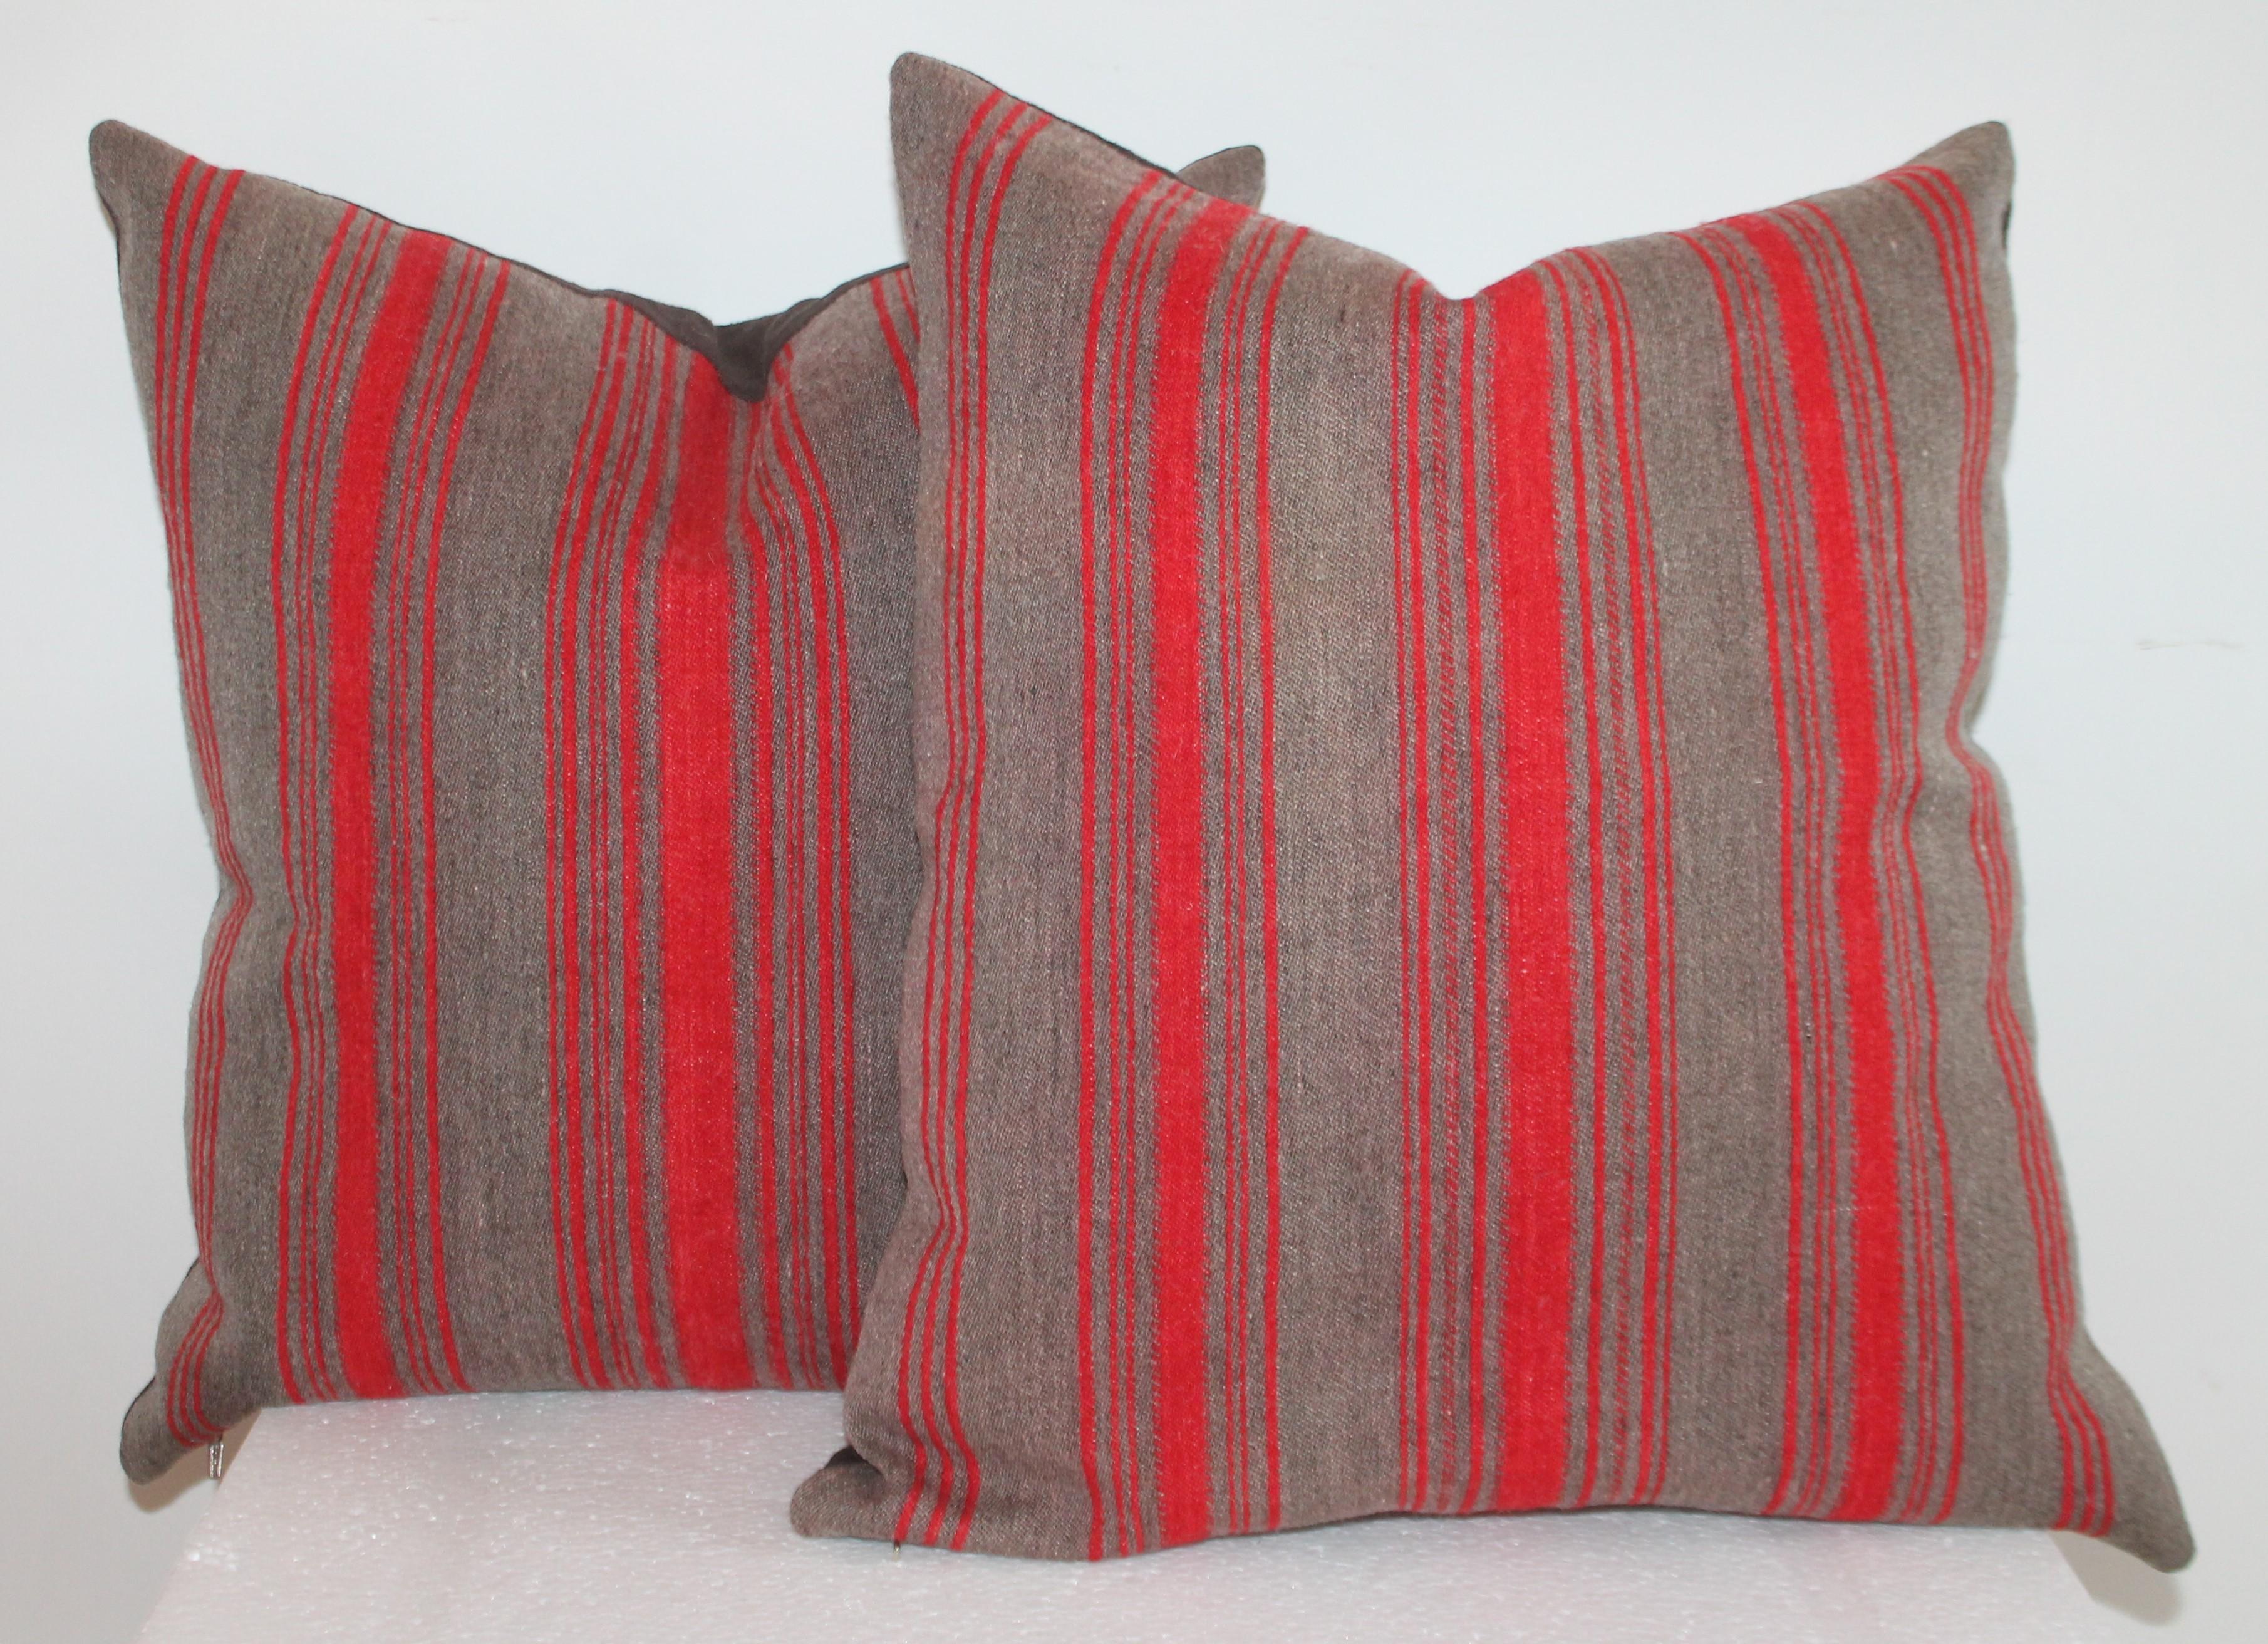 19th century red and grey ticking wool pillows with brown cotton linen backing. The inserts are made of down and feather fill.